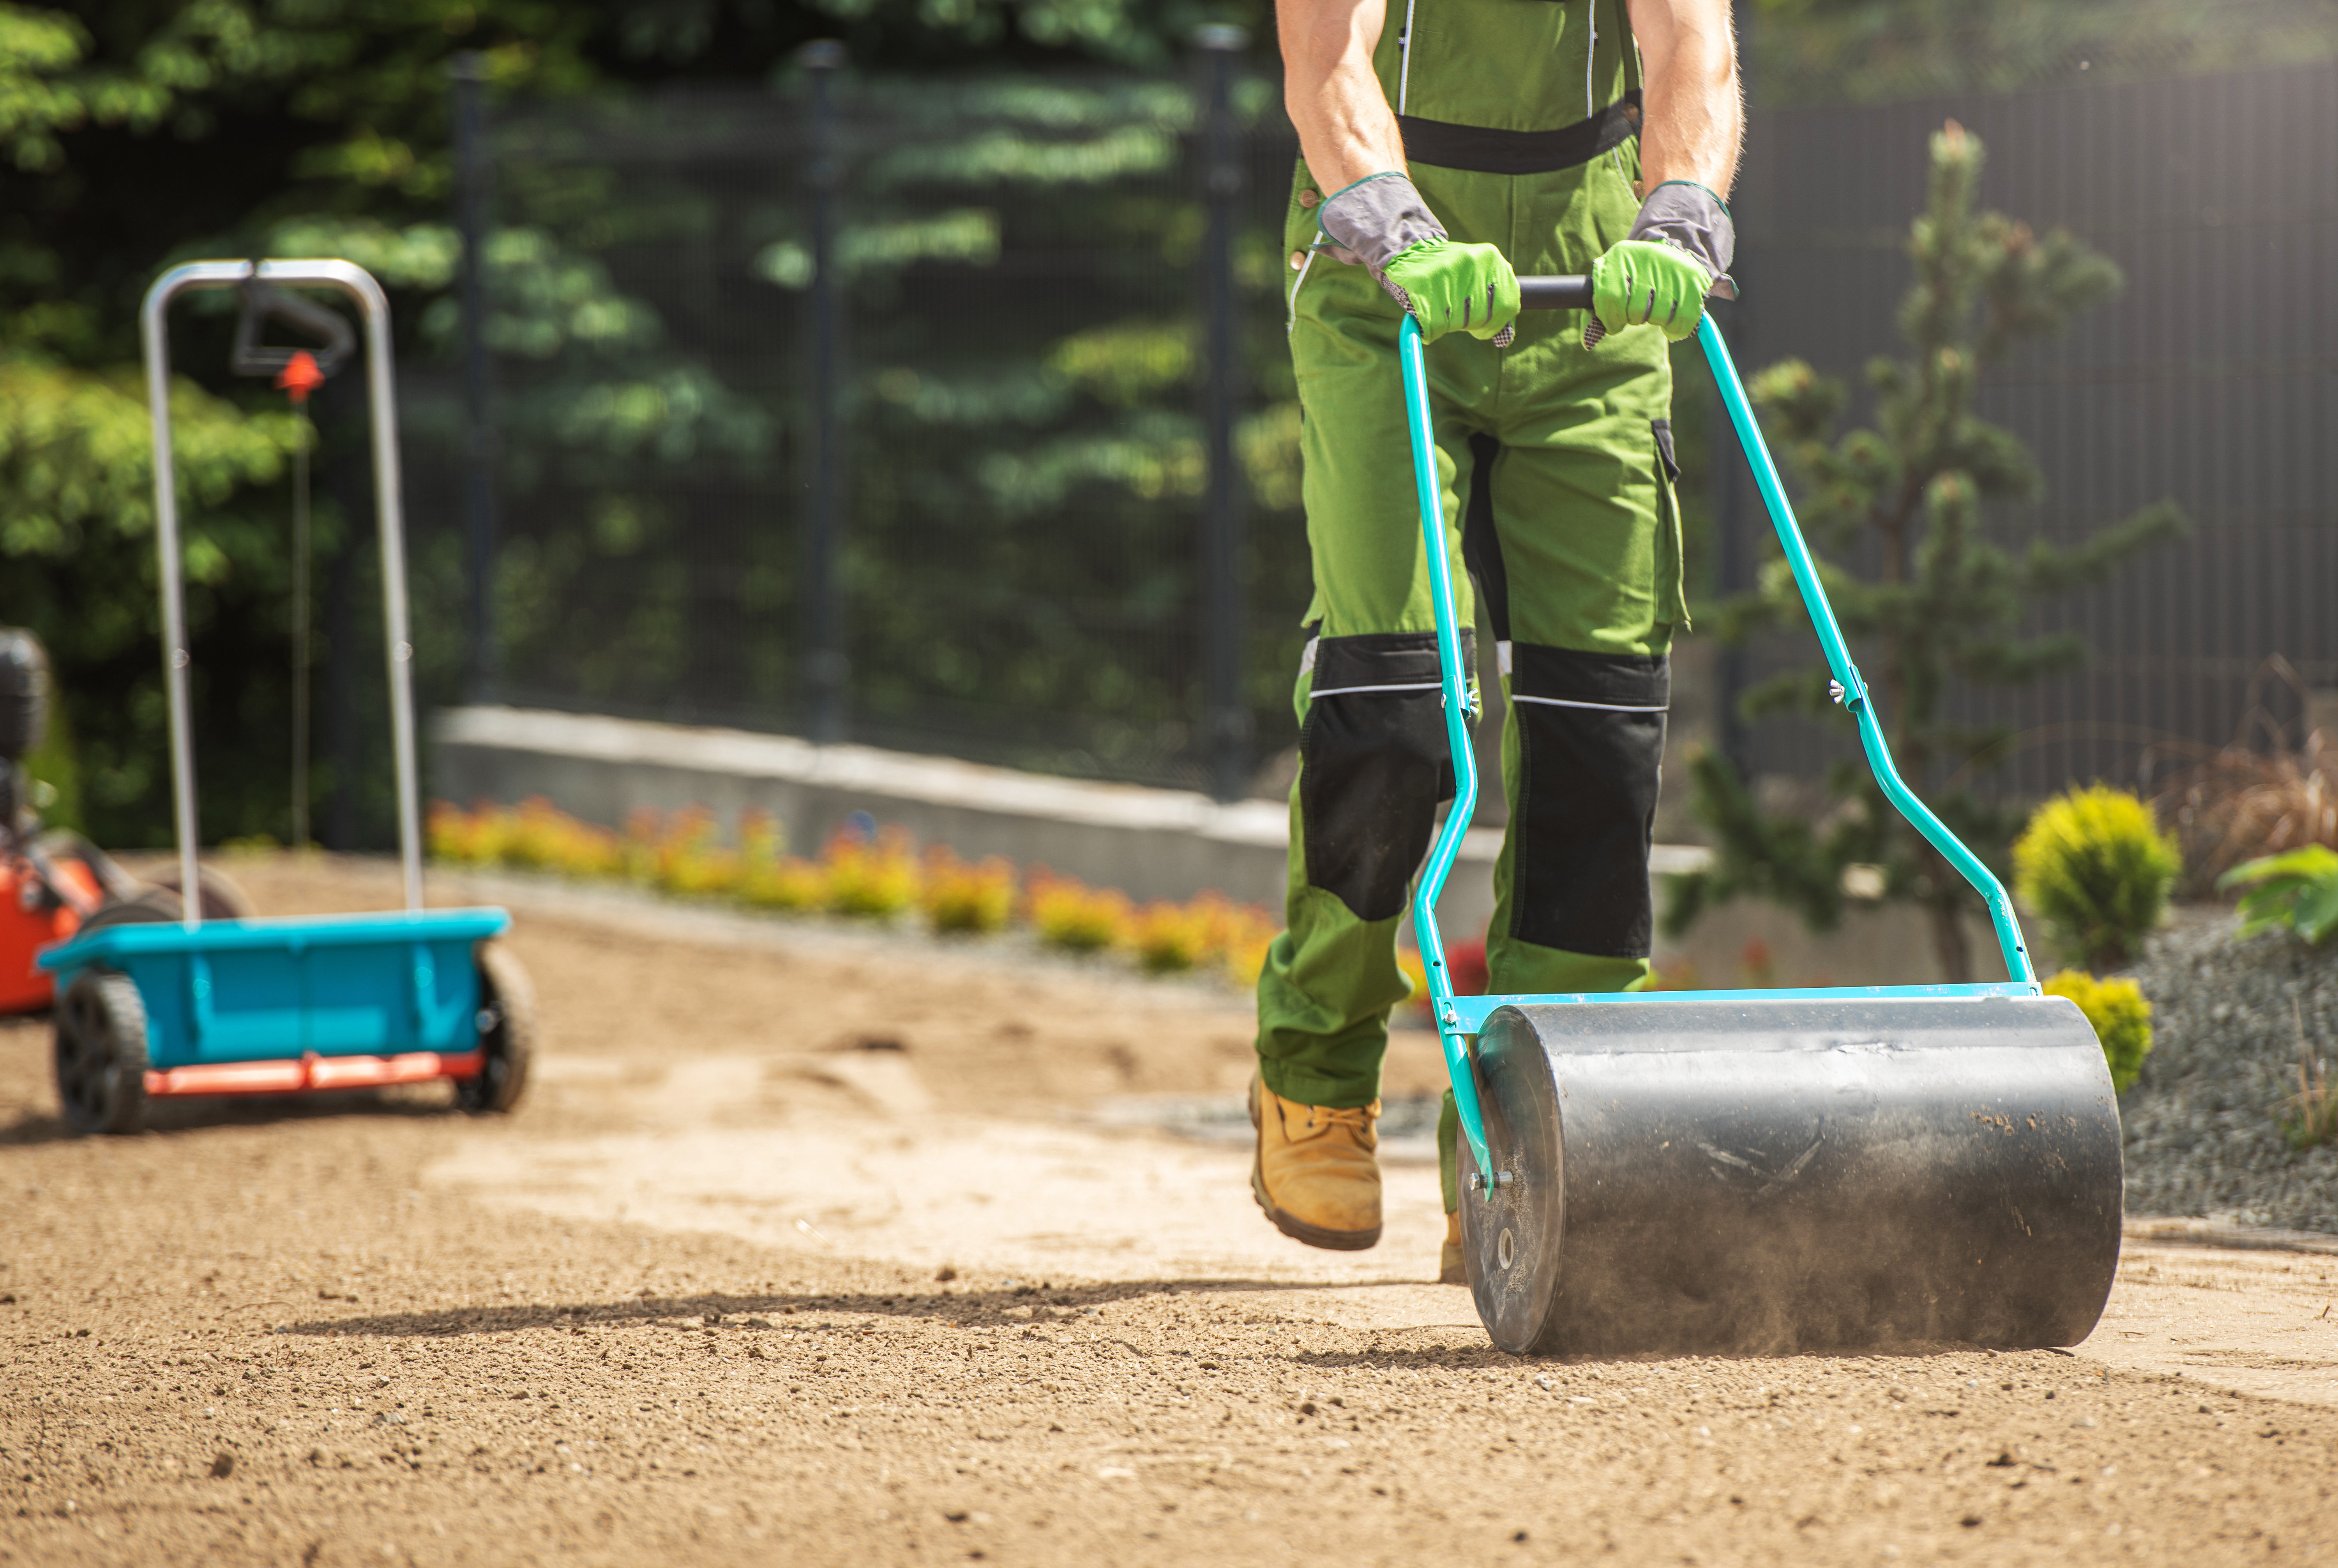 A crew member from one of the Best Landscaping Contractors in the Hamilton Area can be seen dressed in green work trousers with black knee pads. He is pushing a lawn roller over crushed gravel seen in a pathway setting. In the background, there is a green forest and a spare seed dispenser on wheels.